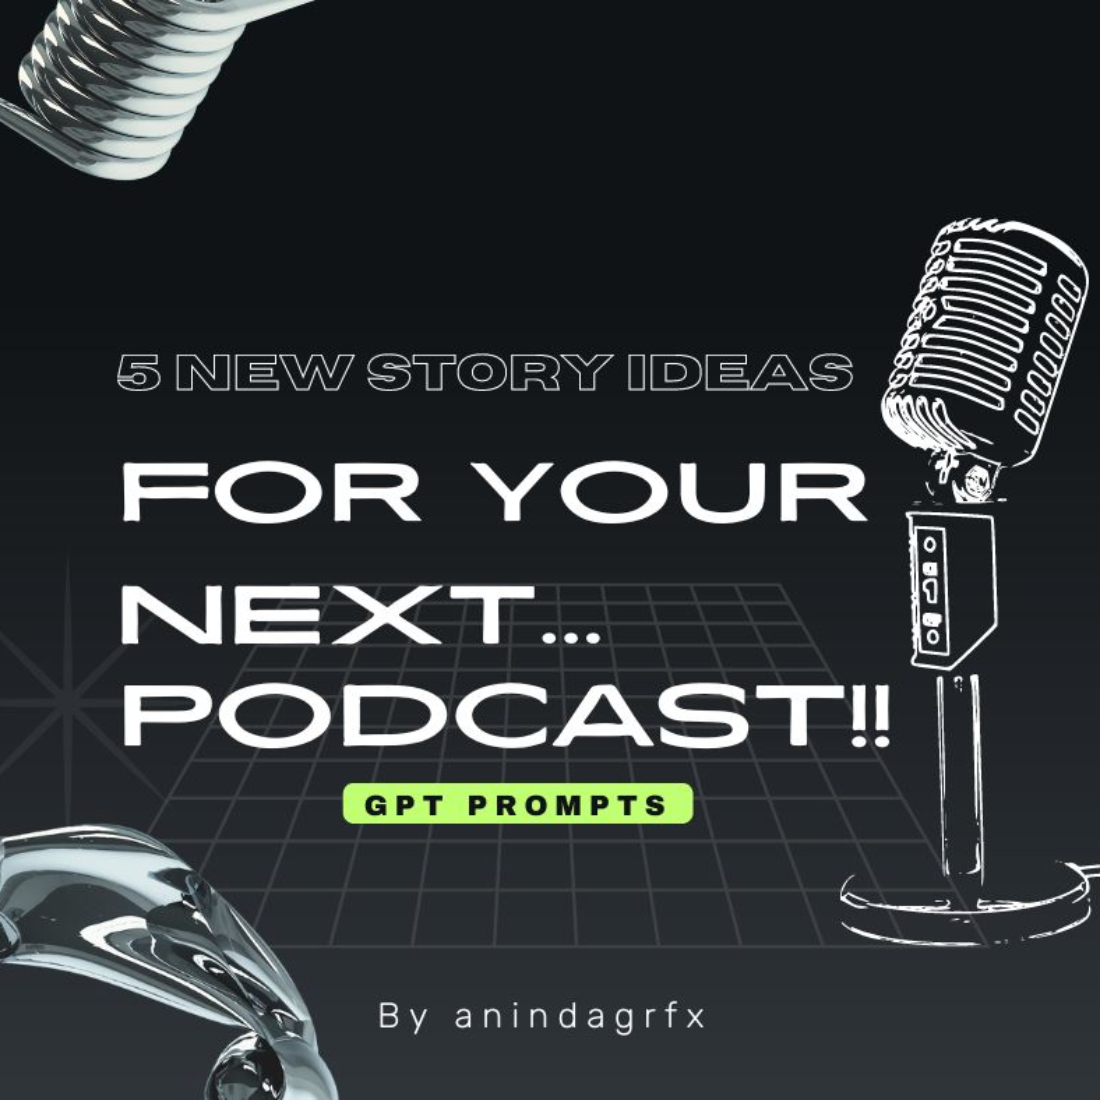 5 New Story Ideas for your next podcast GPT prompts preview image.